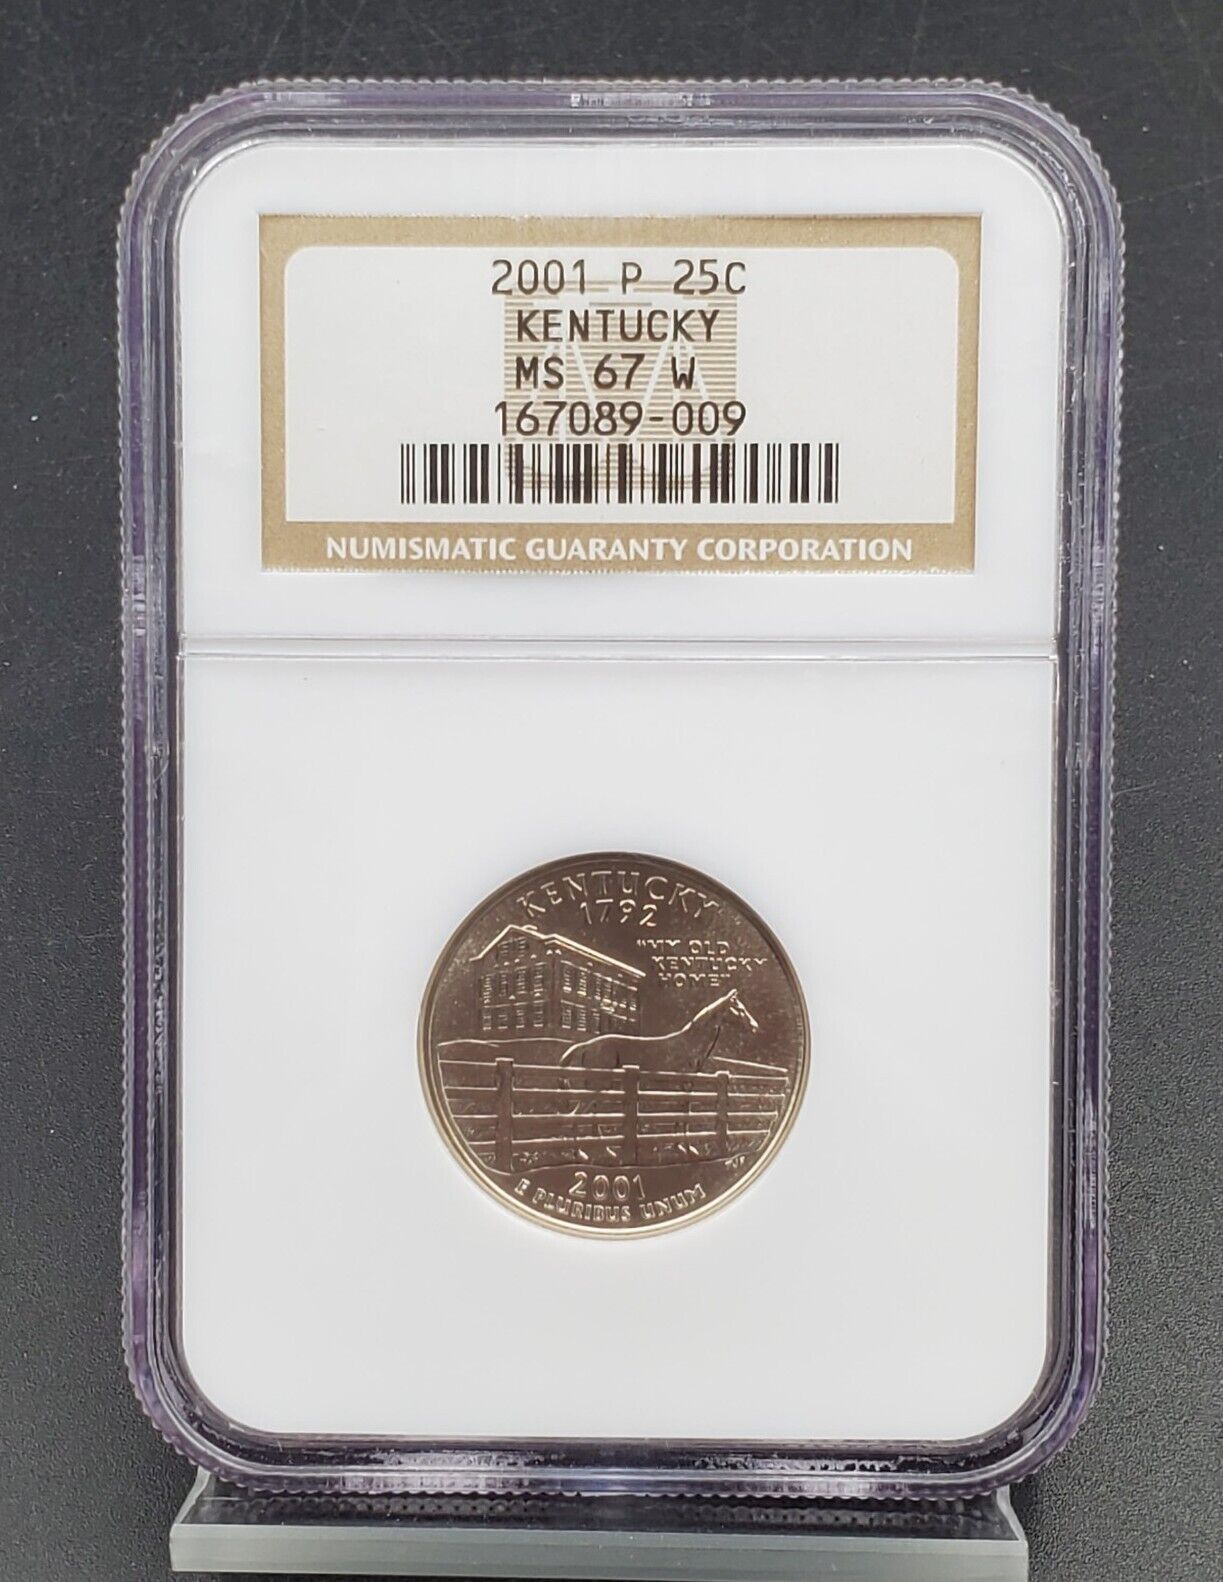 2001 P Kentucky Statehood Quarter Coin NGC MS67 Uncommon " W " holder